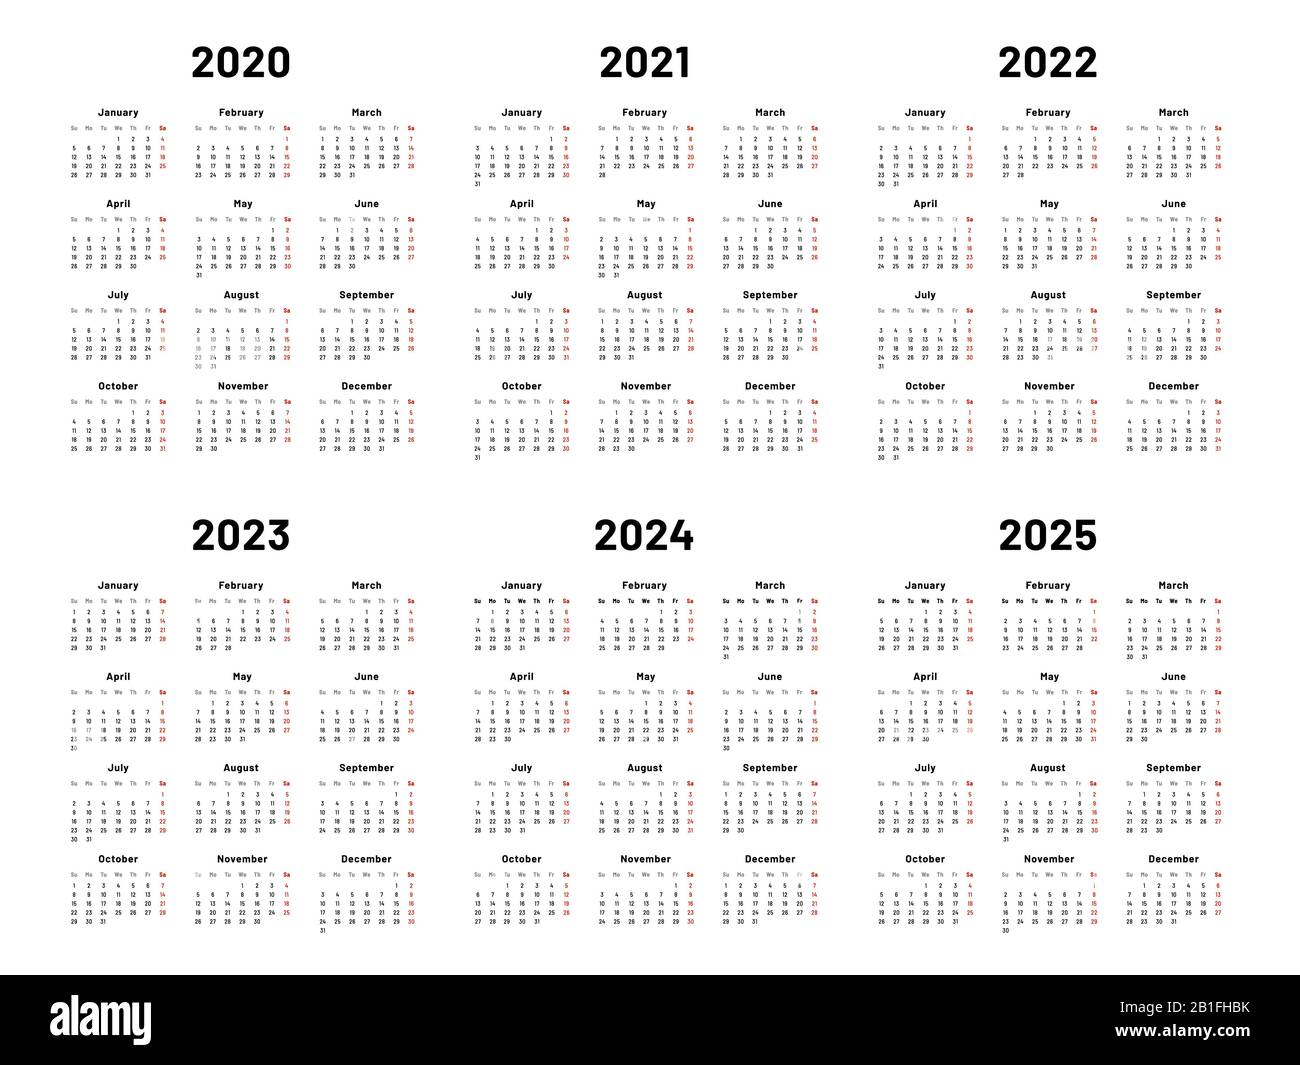 Calendar grid. 2020 2021 and 2022 yearly calendars. 2023, 2024 years organizer and 2025 year weekdays vector illustration set Stock Vector